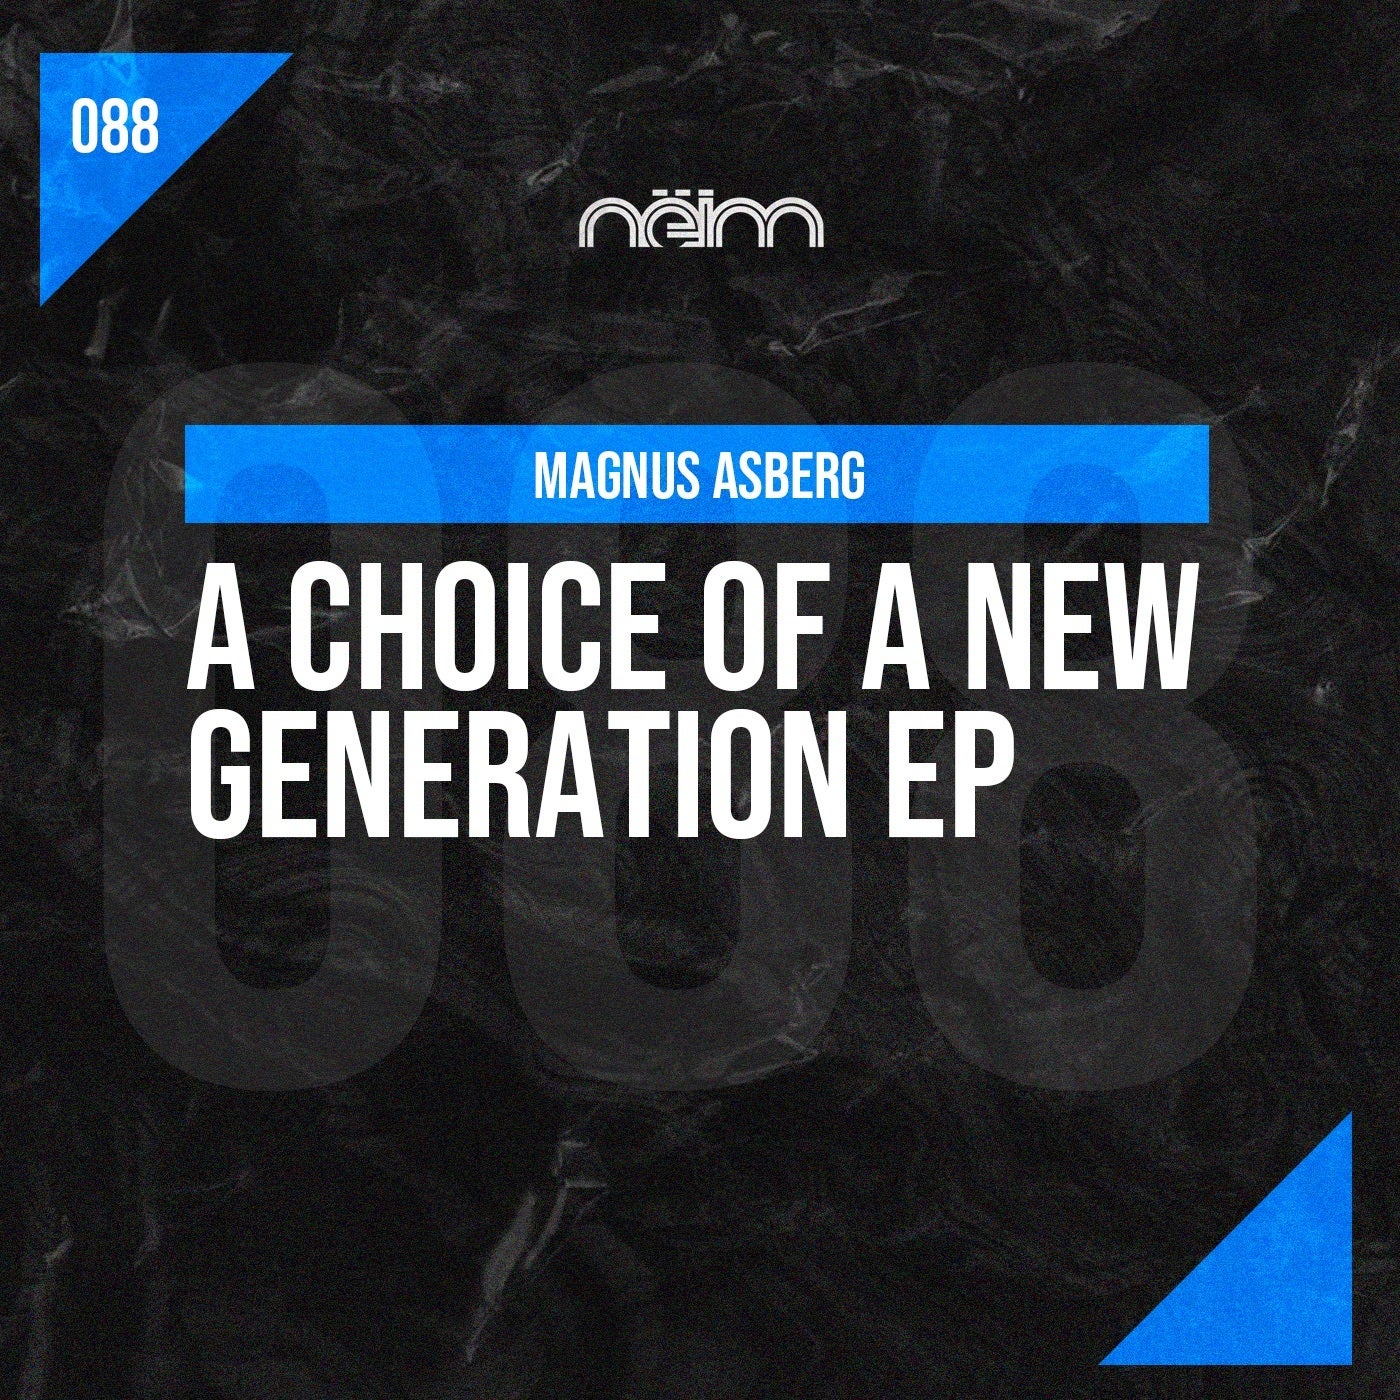 A Choice Of A New Generation EP